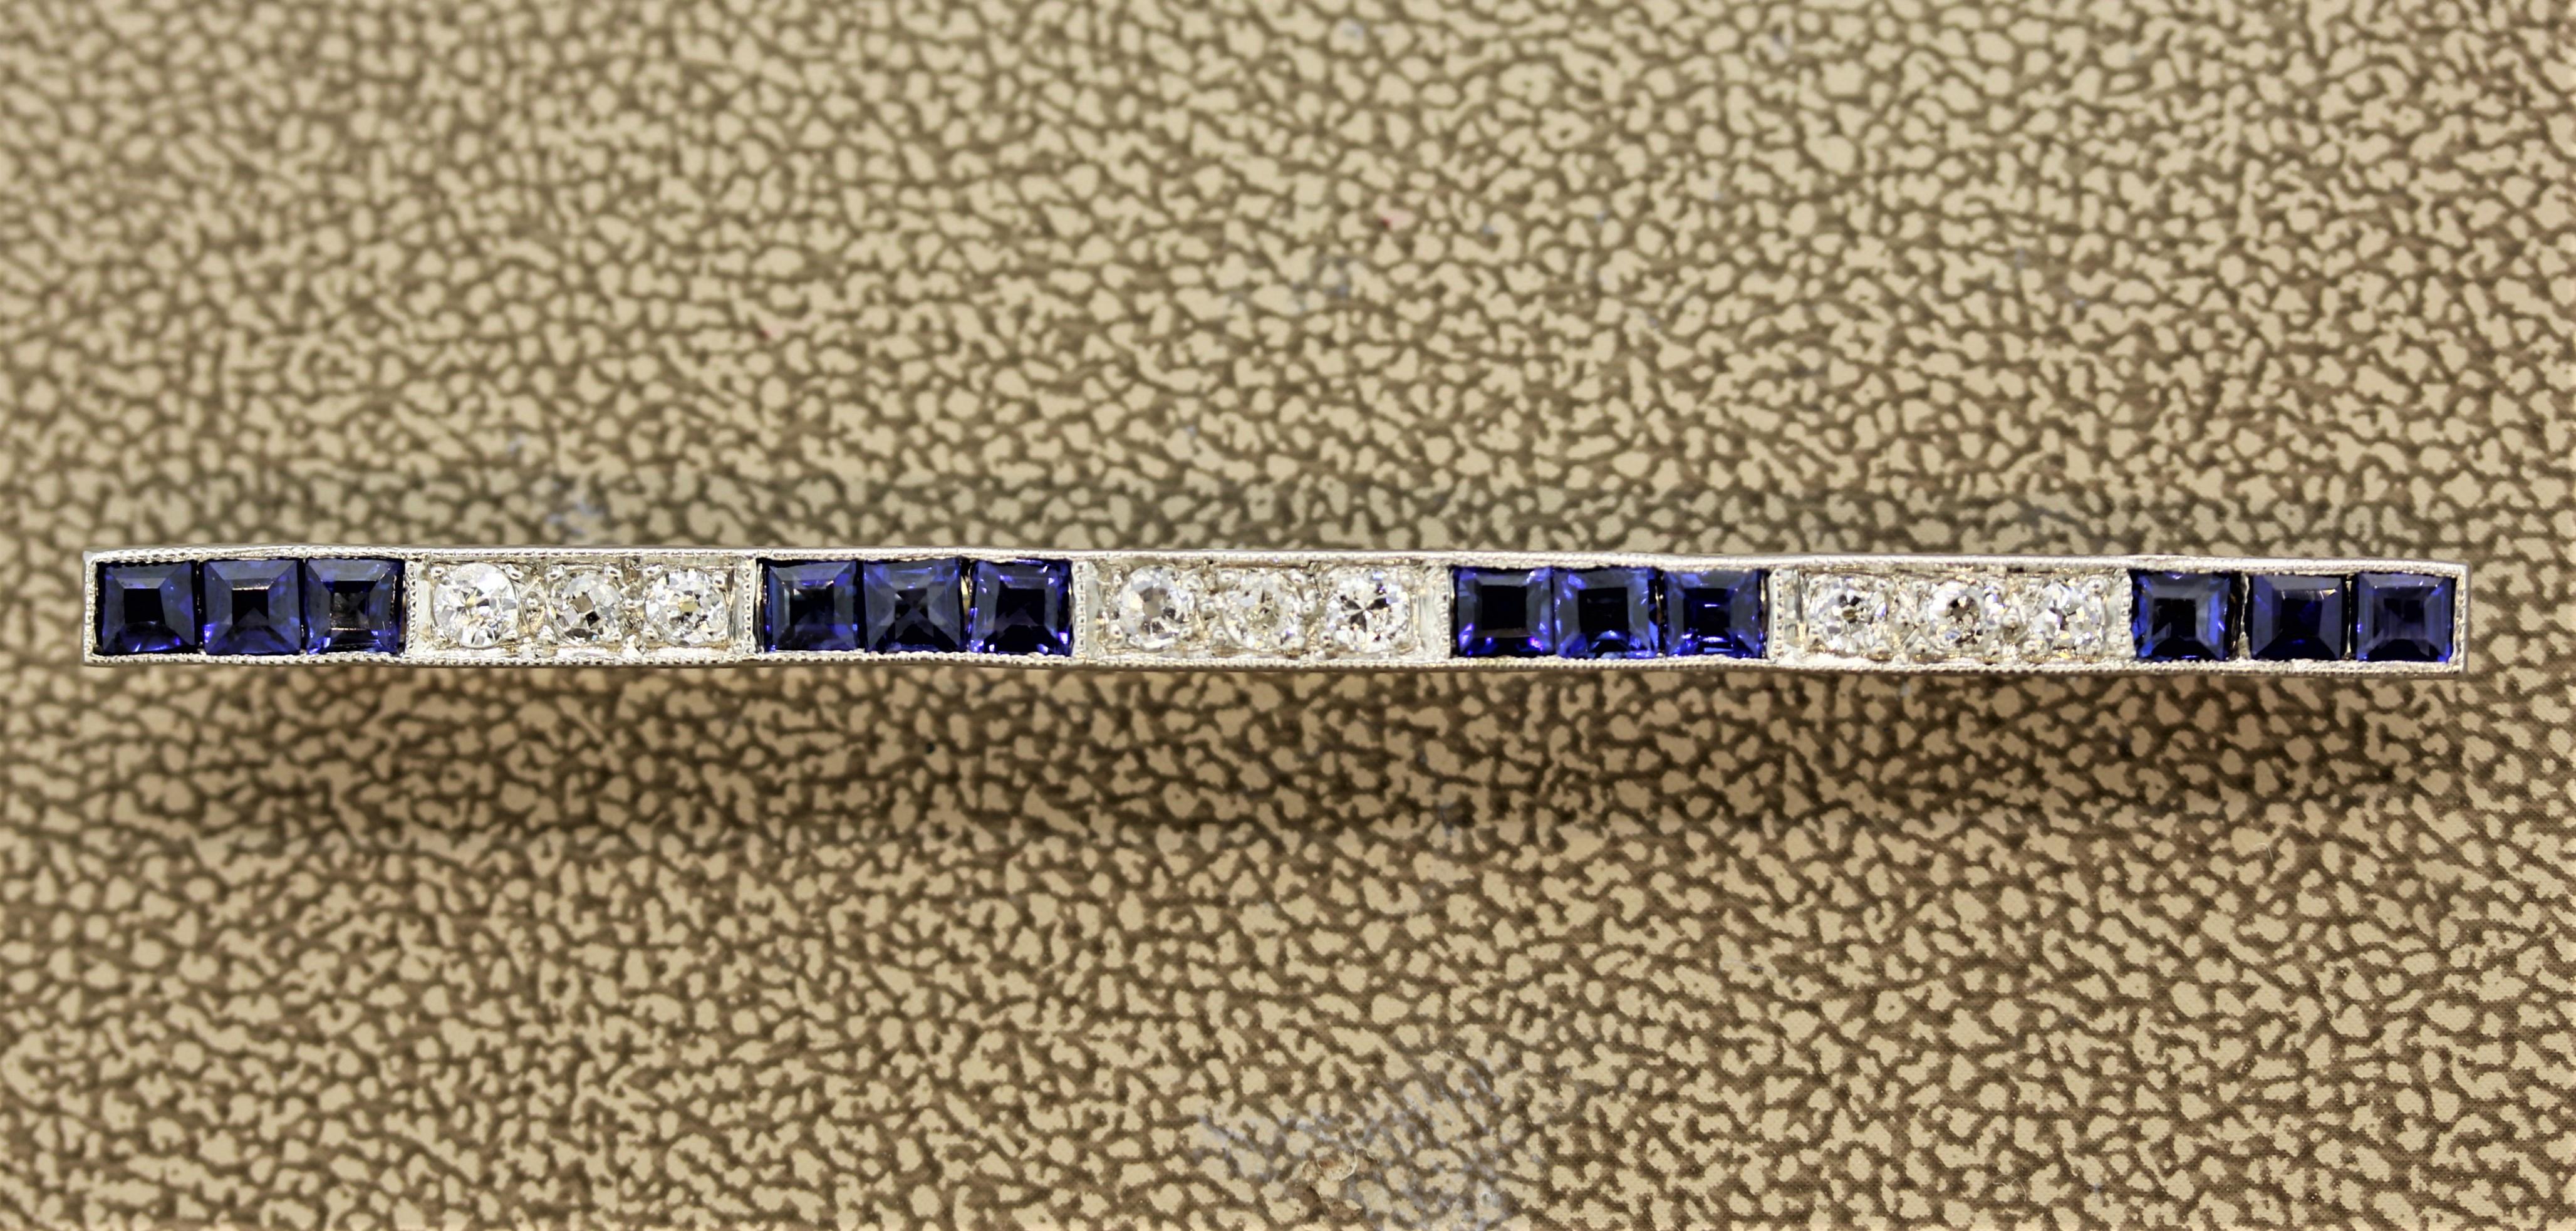 A classic Art Deco piece from the 1920’s, this bar pin features alternating patterns of diamonds and blue sapphires. There are 9 European cut diamonds along with 12 French cut sapphires. Set in platinum with a 14k yellow gold pin and catch.

Length: